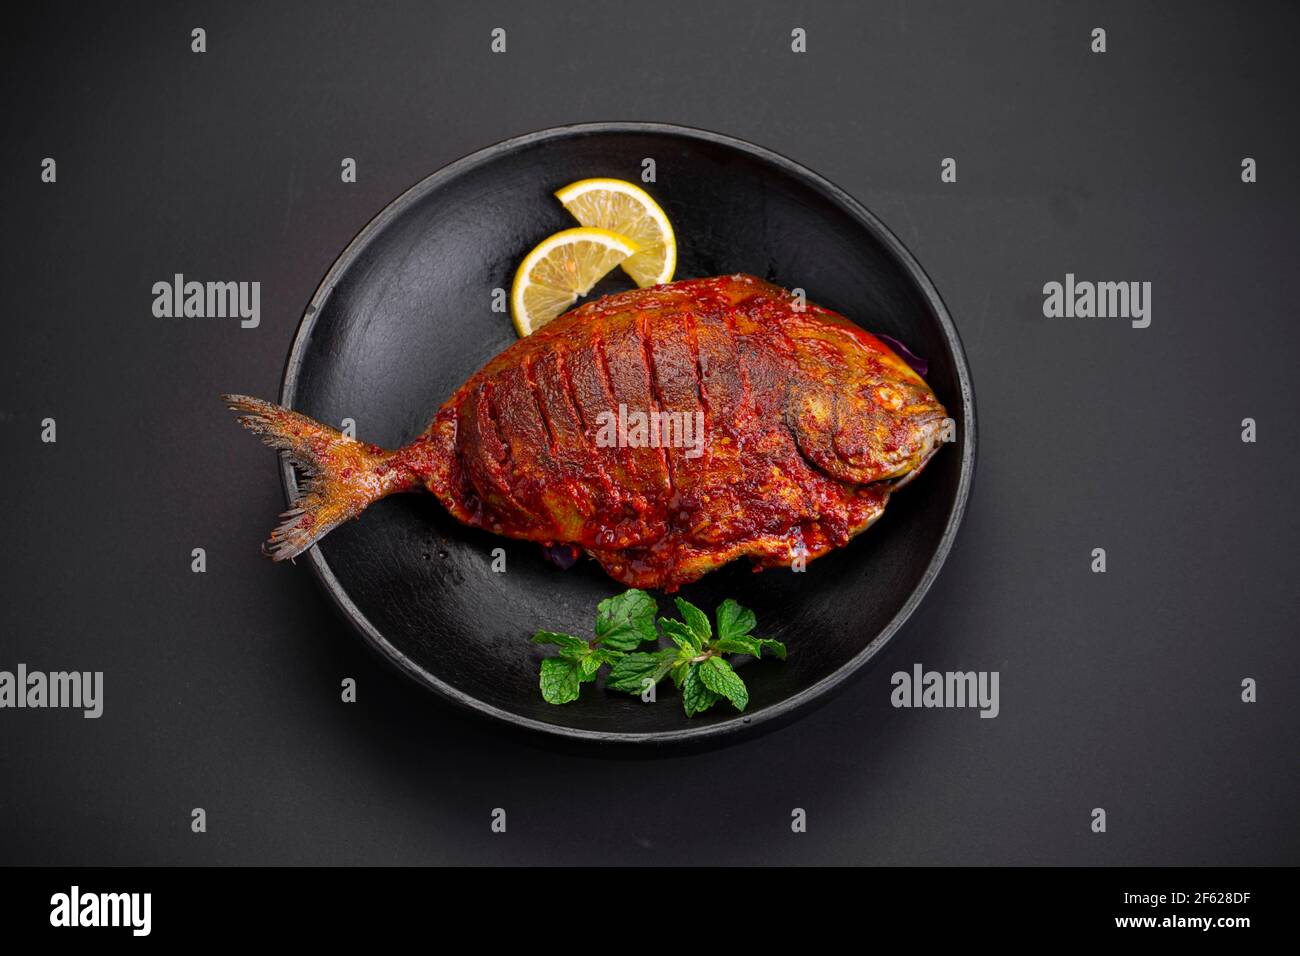 Pomfret fry arranged in  a black plate and garnished with lemon slices on black textured background. Stock Photo